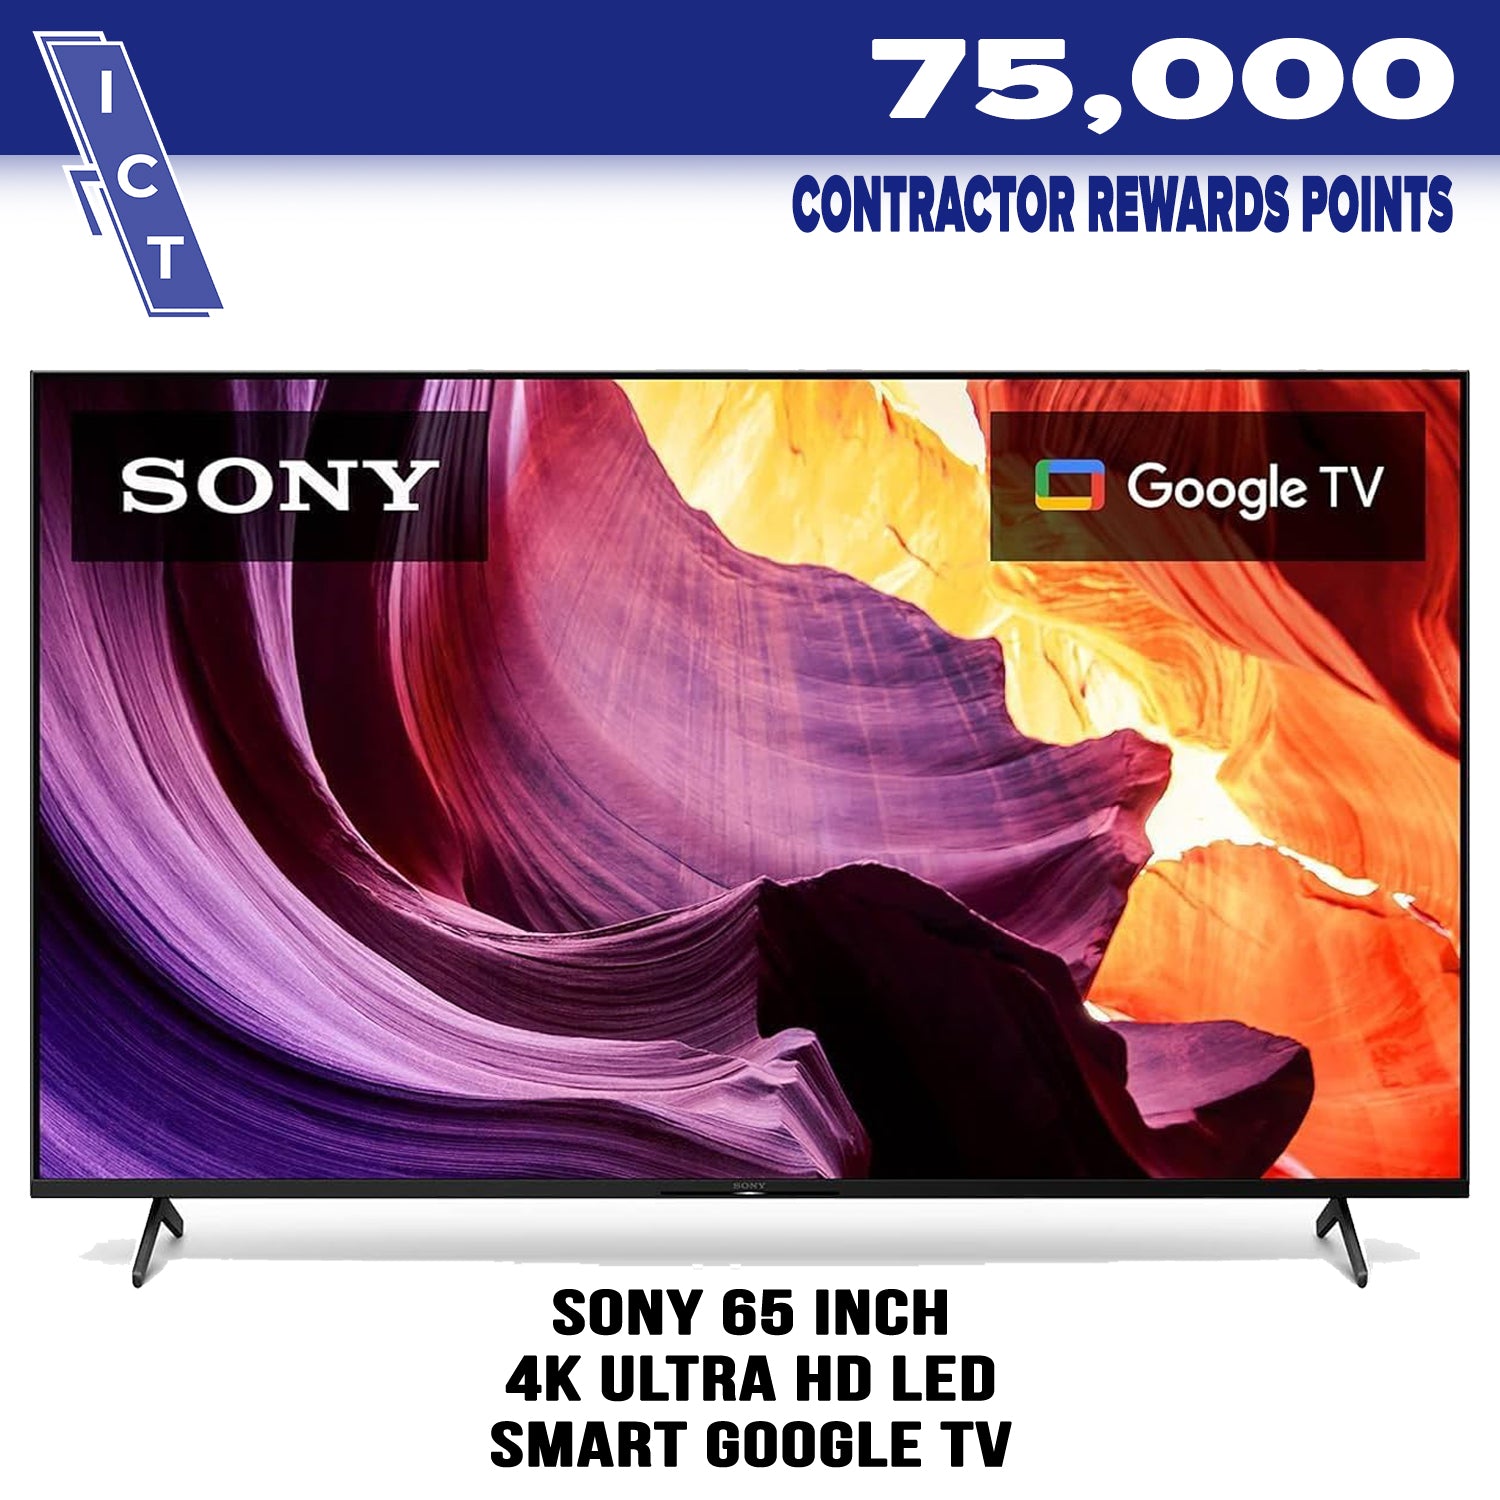 Sony TV prize for 75000 points